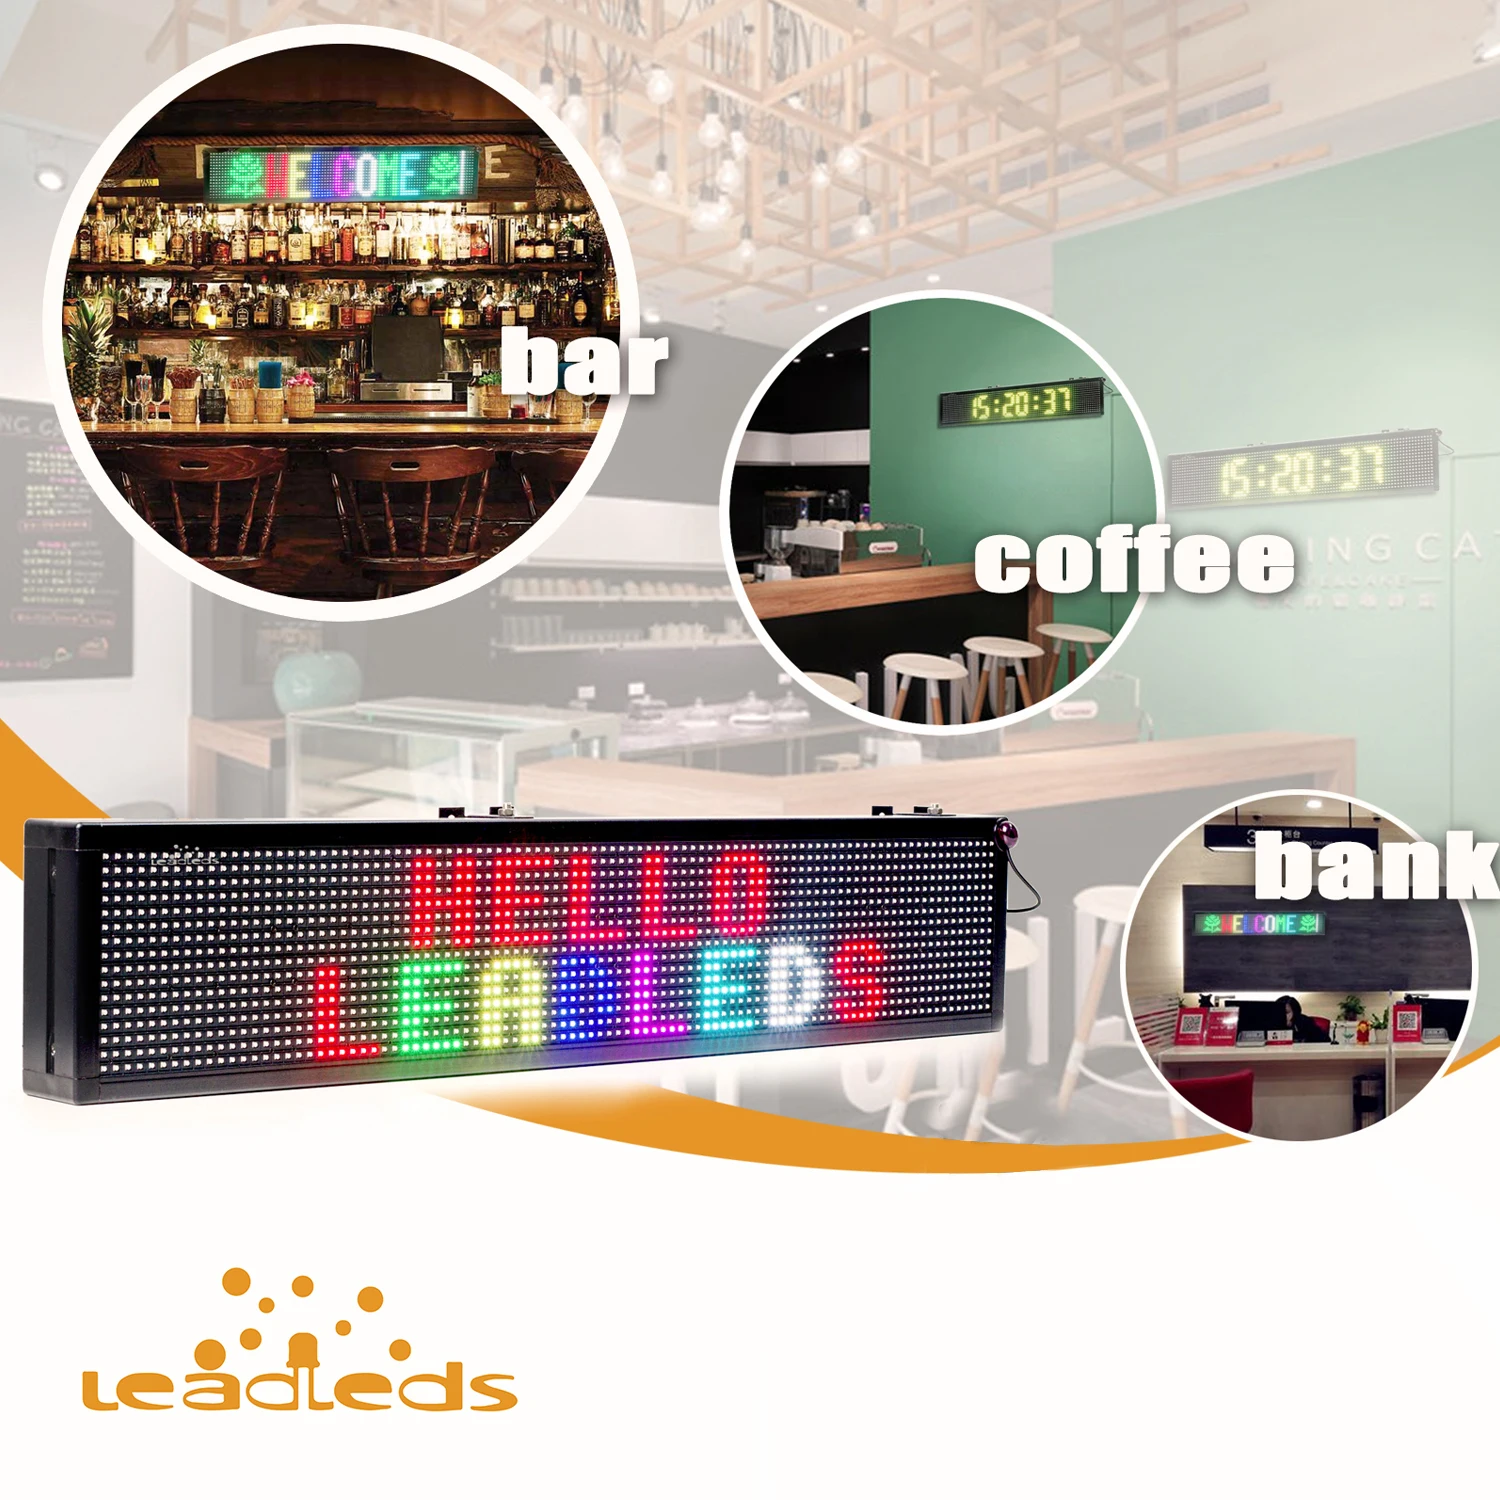 Leadleds P7.62 Full Color Led Display Board Indoor Use Fast Programmable By  App And Pc Software Multi-language Text Images Timer Led Displays  AliExpress